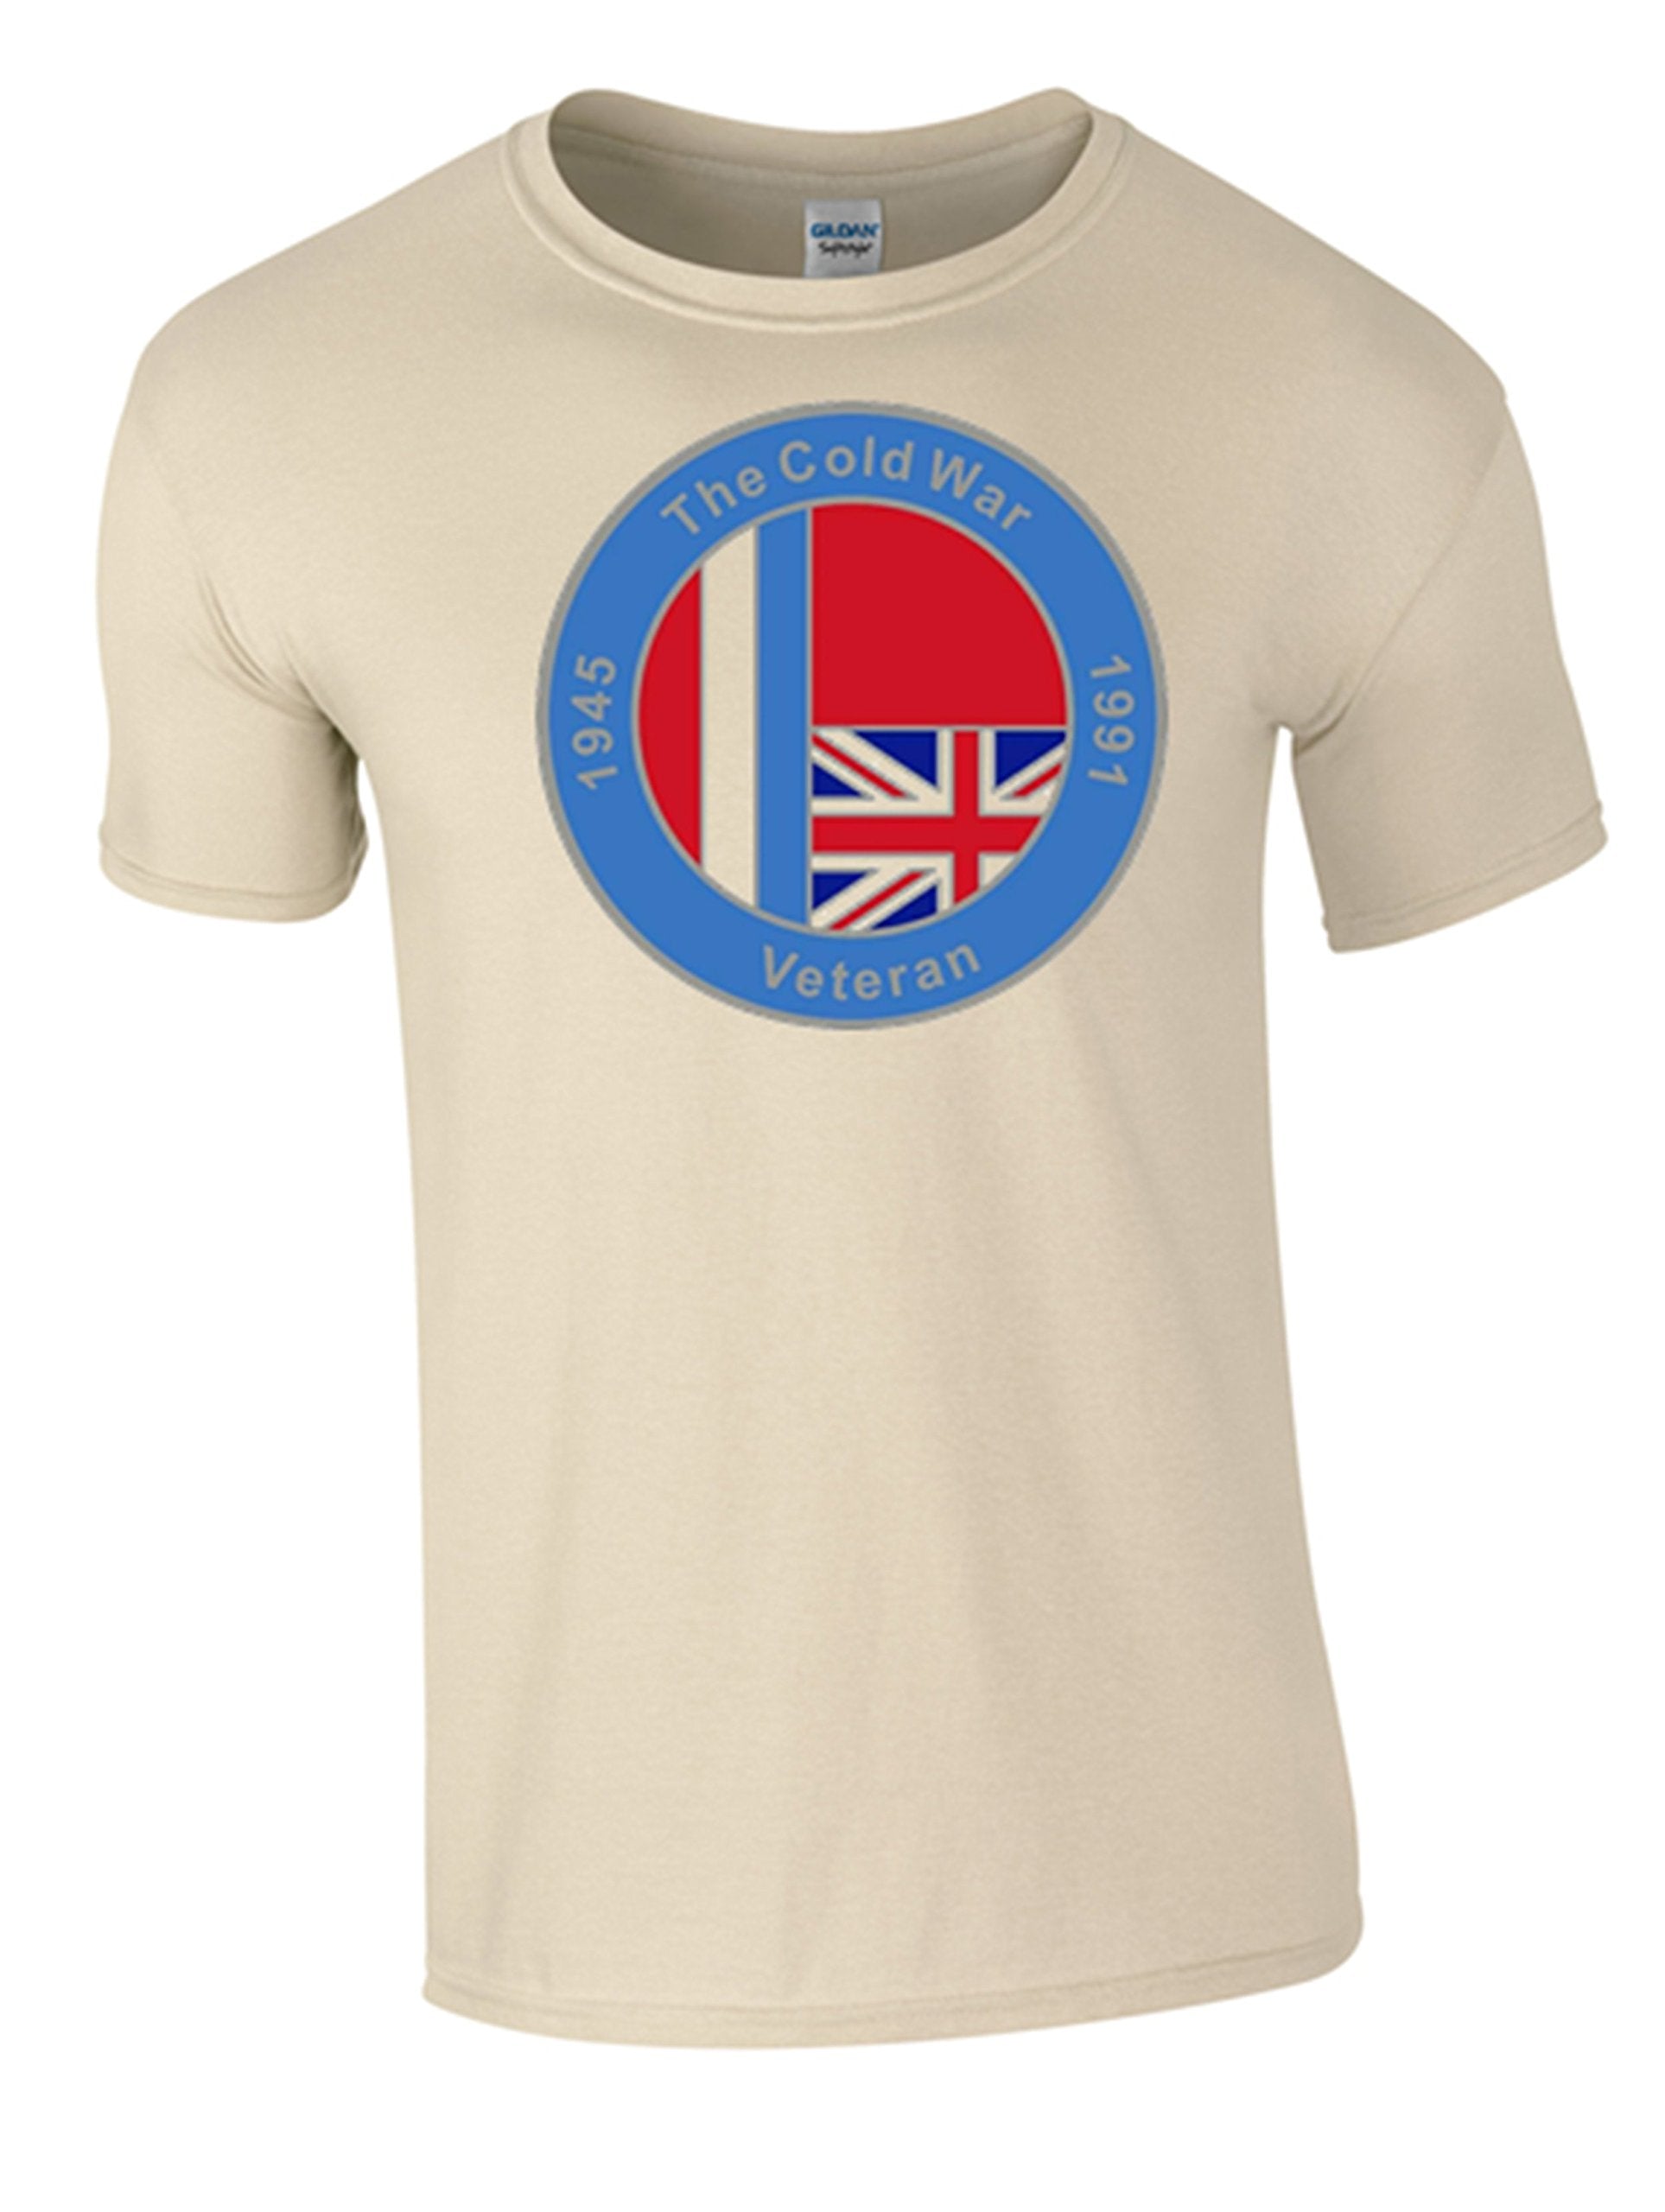 Bear Essentials Clothing. Cold War Op Banner T/Shirt (XL, Sand) - Army 1157 kit Army 1157 Kit